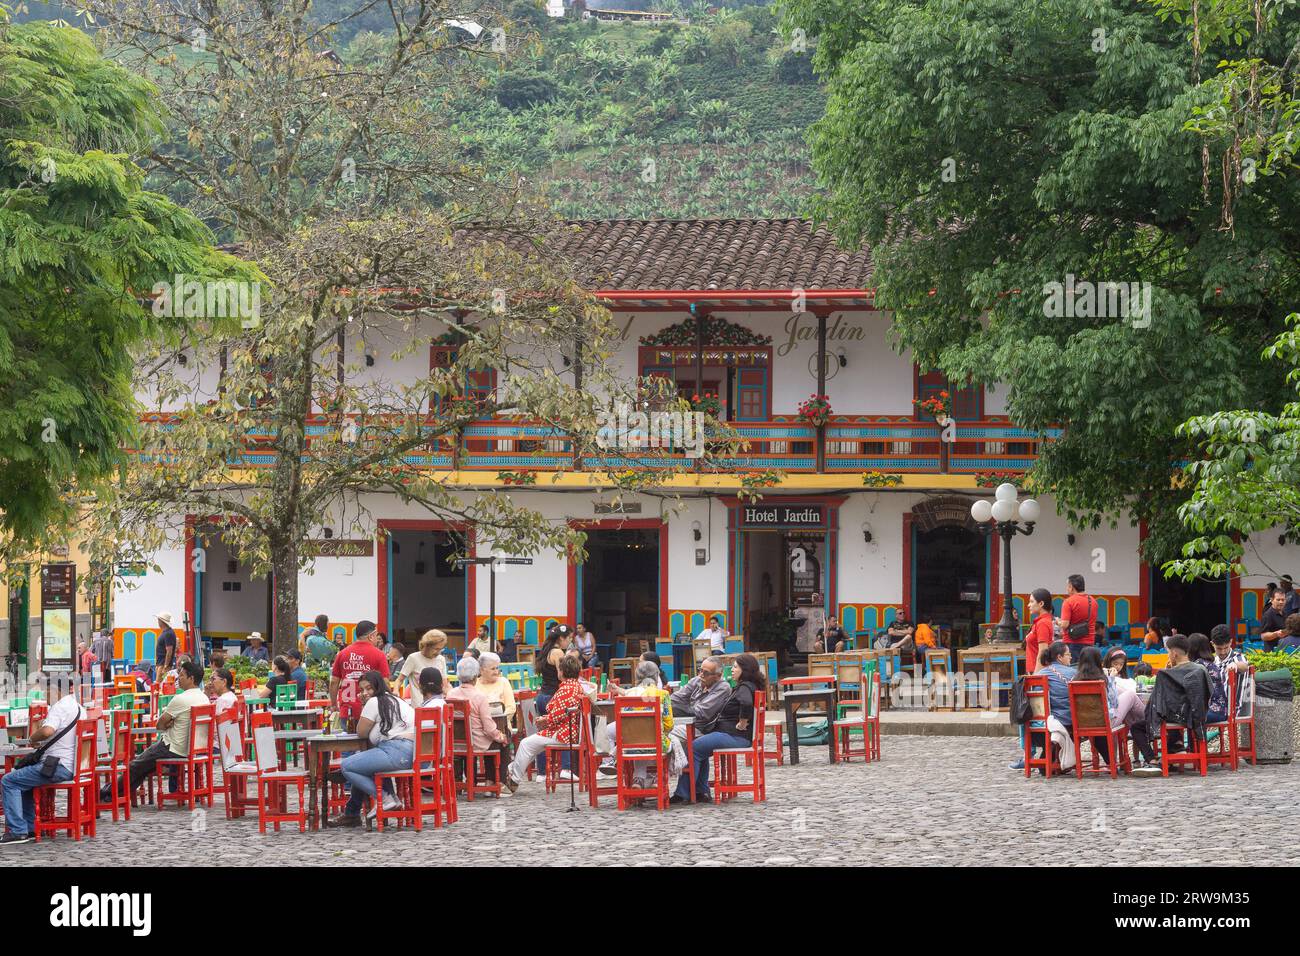 Locals and tourists enjoying afternoon at the main square in Jardin, Antioquia, Colombia. Stock Photo